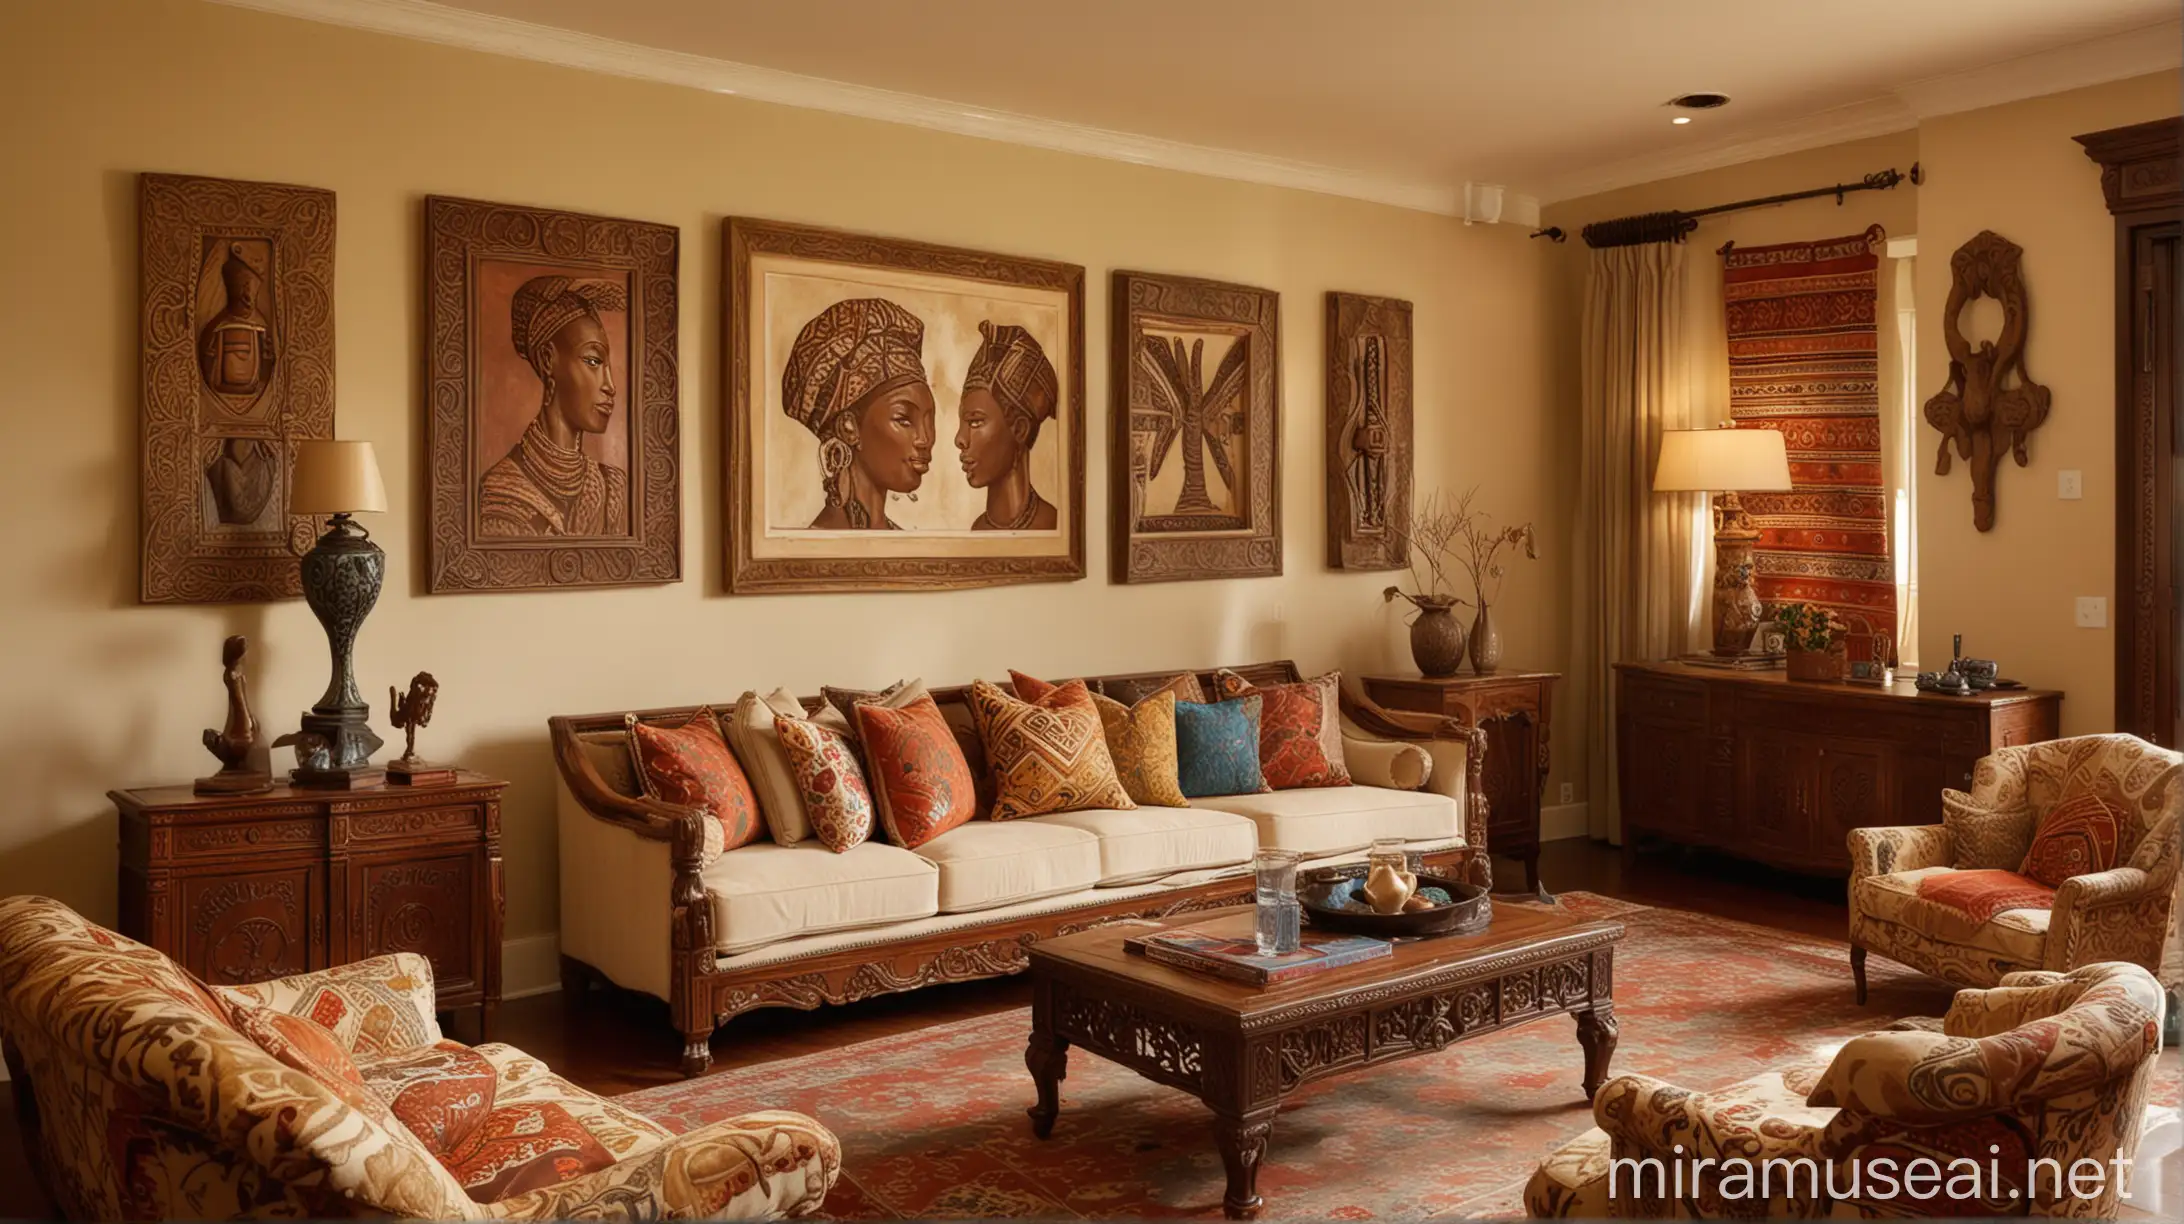 Cozy AfricanInspired Living Room with Family Photos and Wooden Furnishings